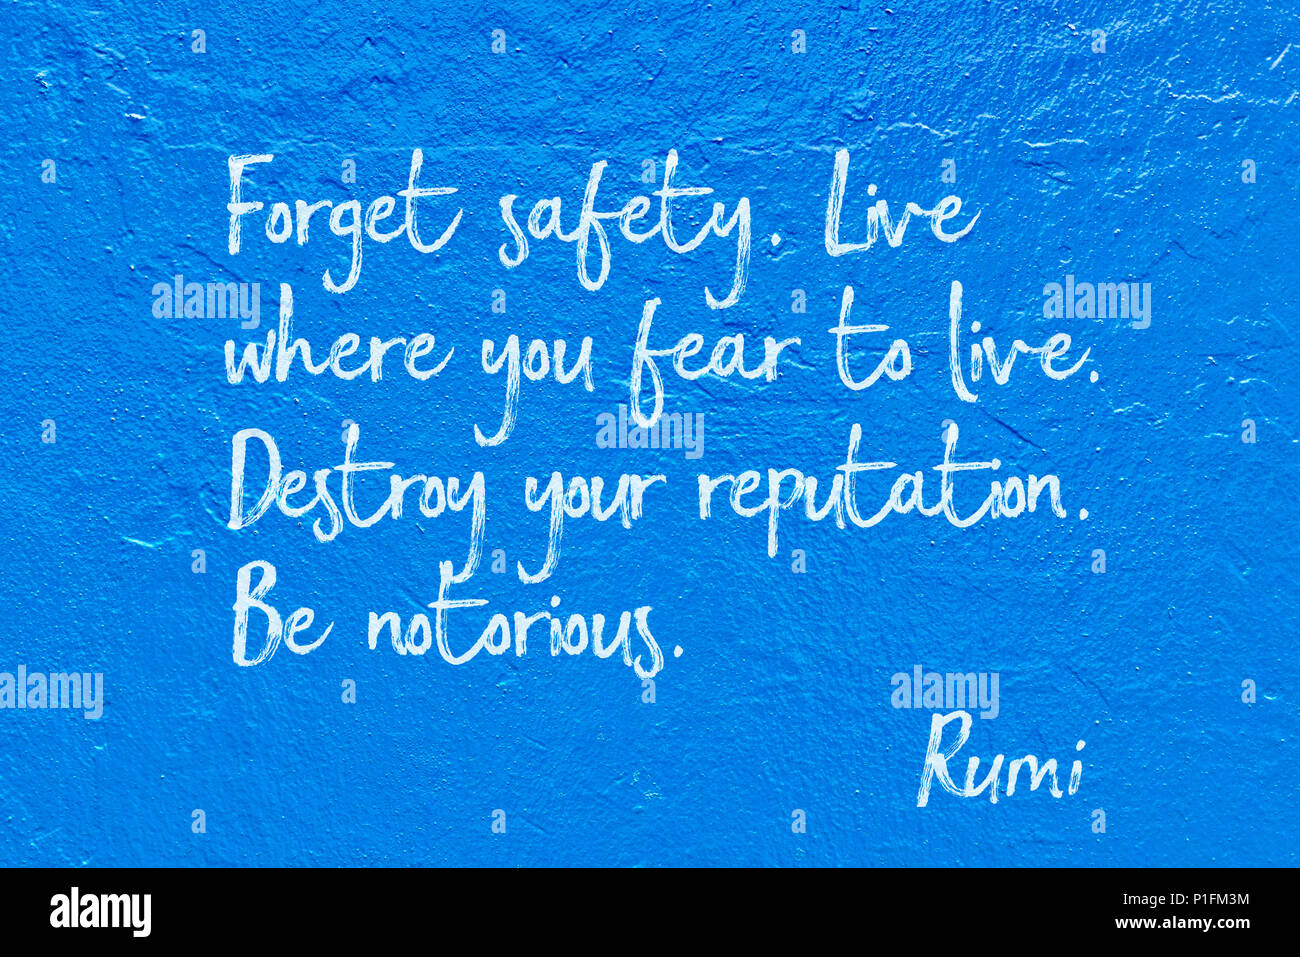 Destroy your reputation. Be notorious - ancient Persian poet and philosopher Rumi quote handwritten on blue wall Stock Photo